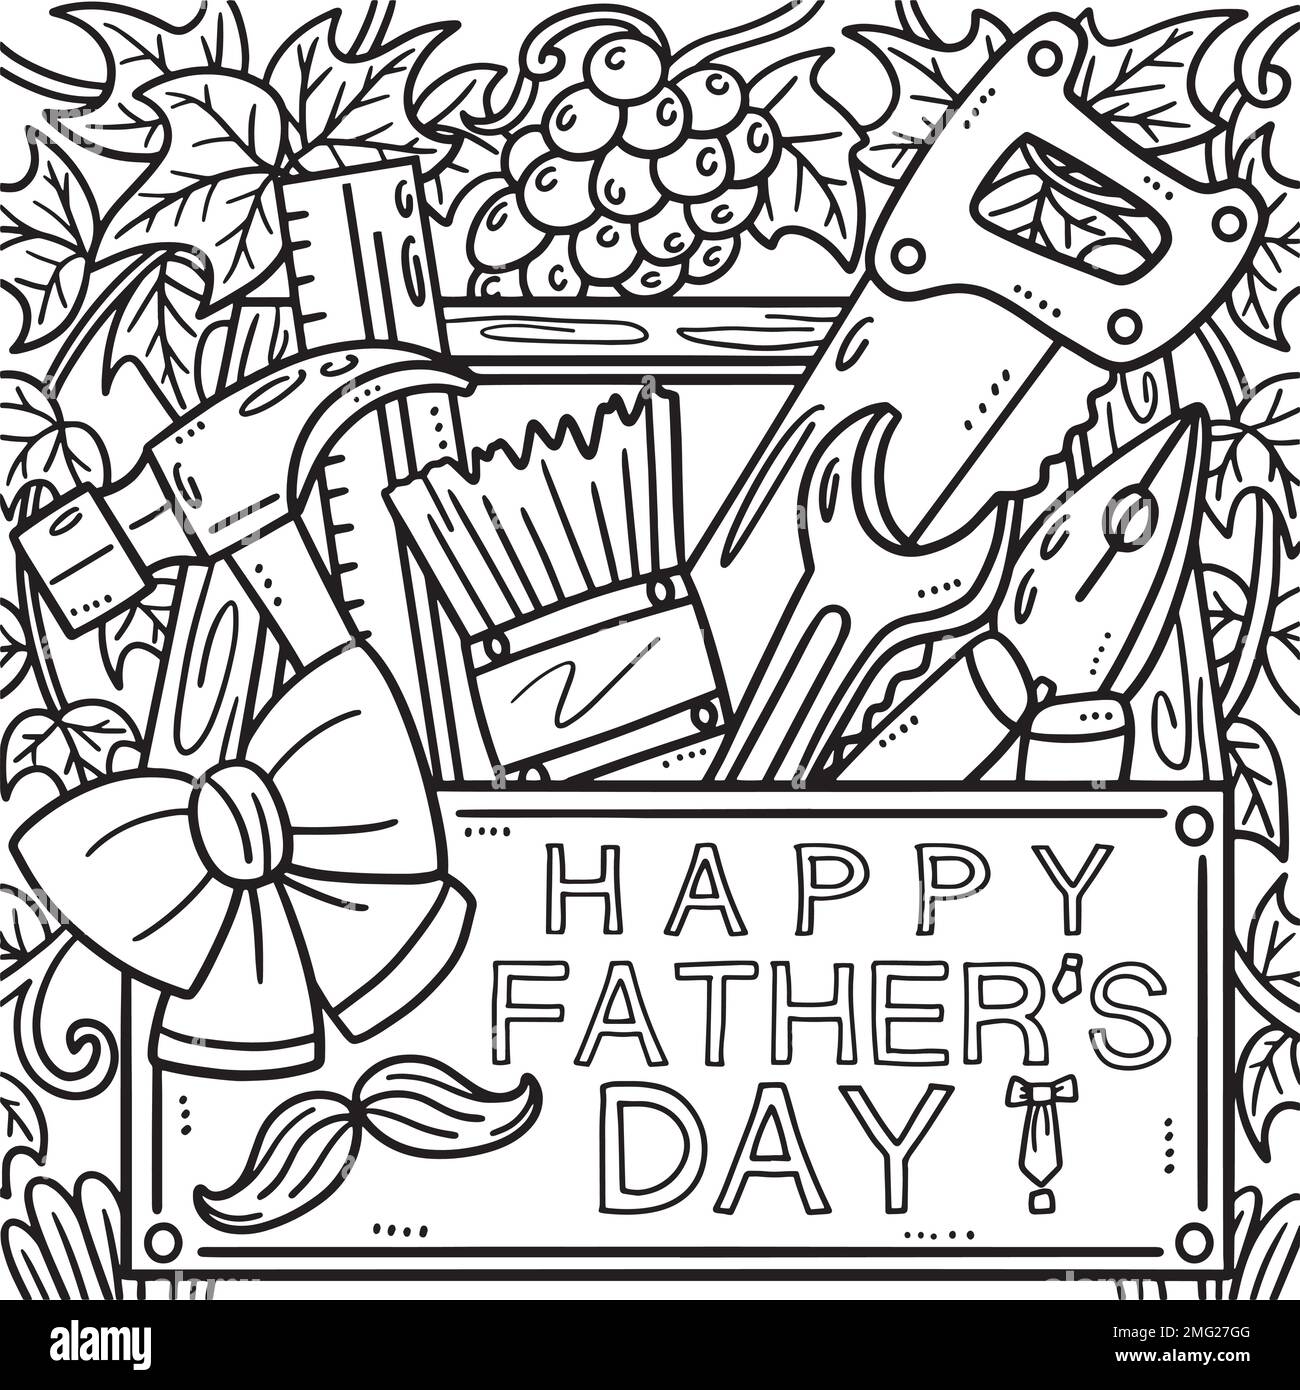 Happy Fathers Day Toolbox Coloring Page for Kids Stock Vector